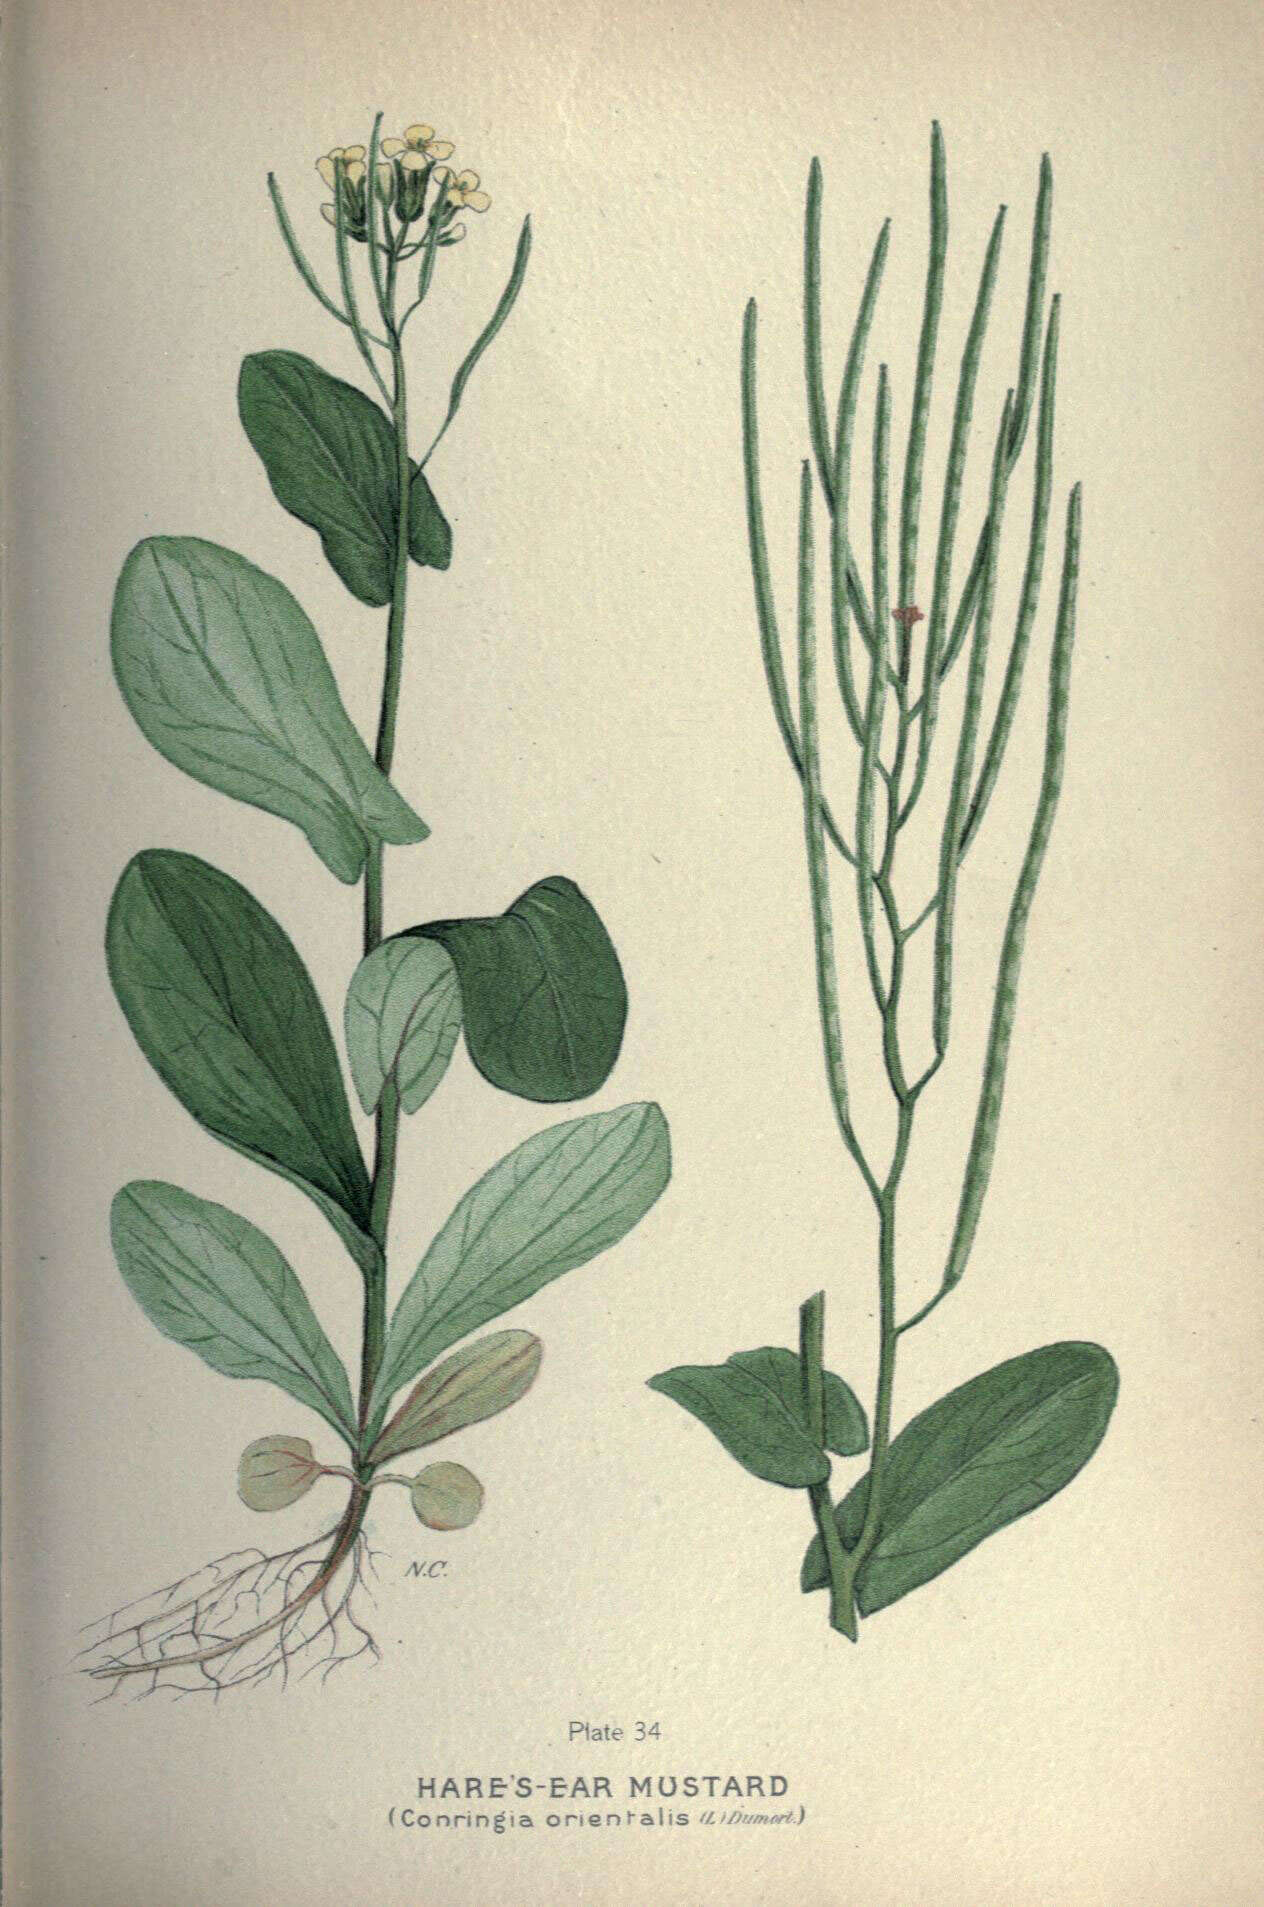 Image of hare's ear mustard